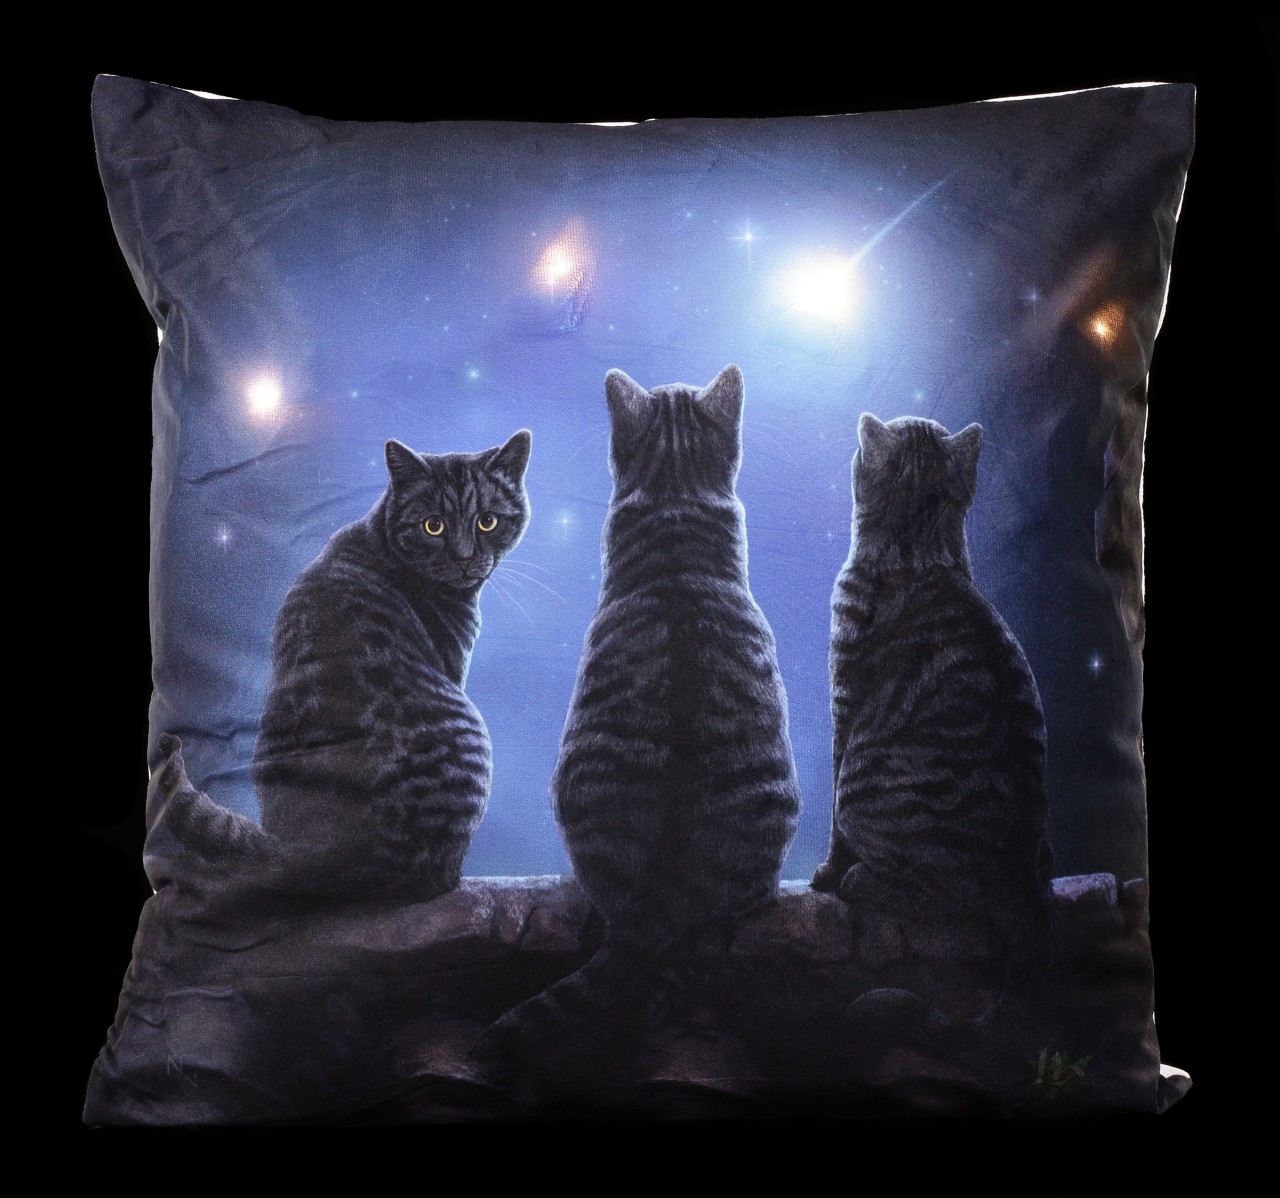 LED Cushion with Cats - Wish Upon a Star